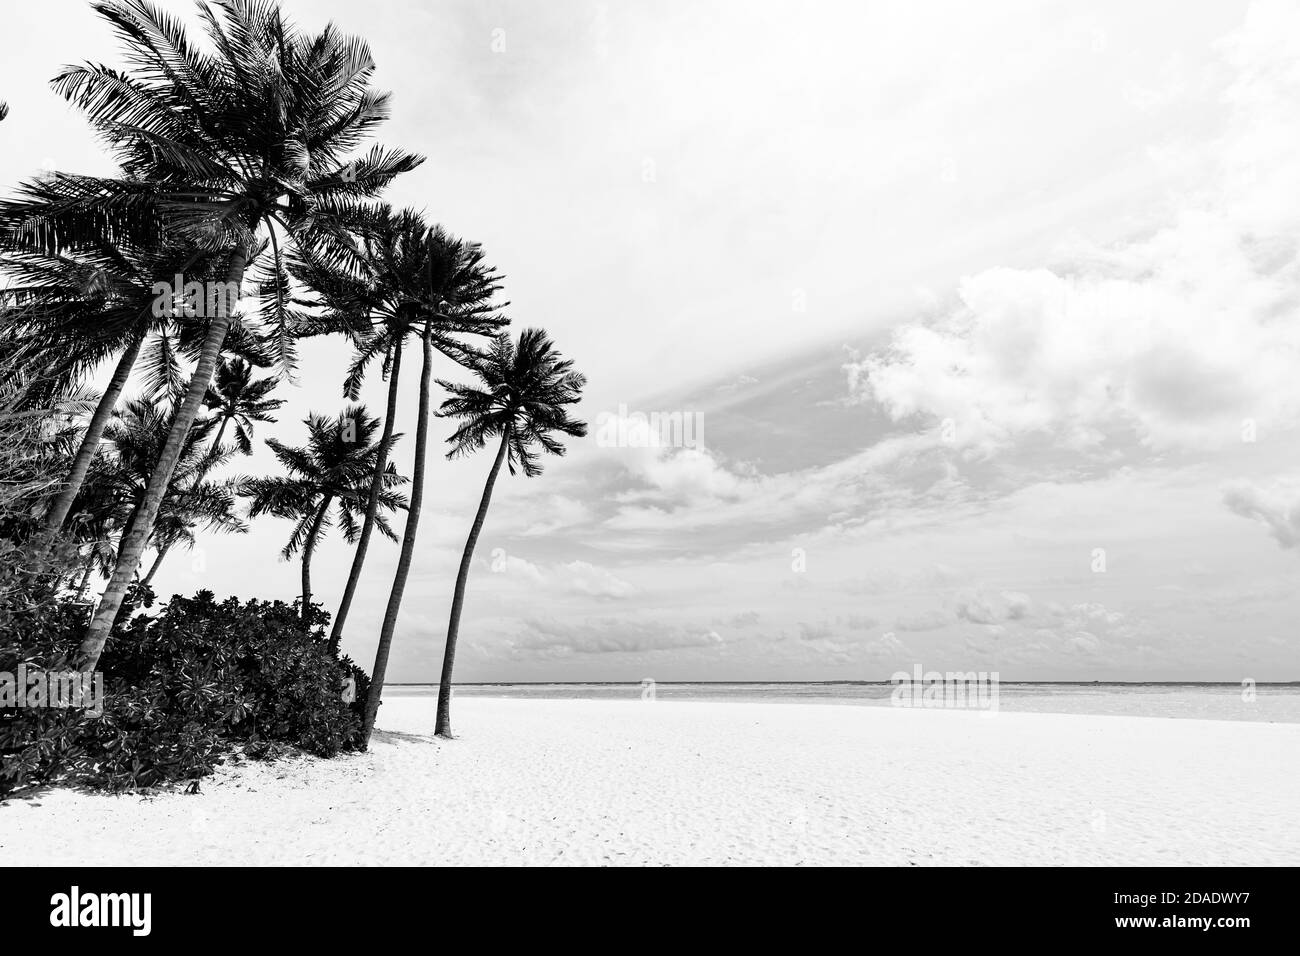 Black and white view of beautiful beach with palm trees. Endless white sandy beach landscape, cloudy seascape view. Dramatic nature background Stock Photo